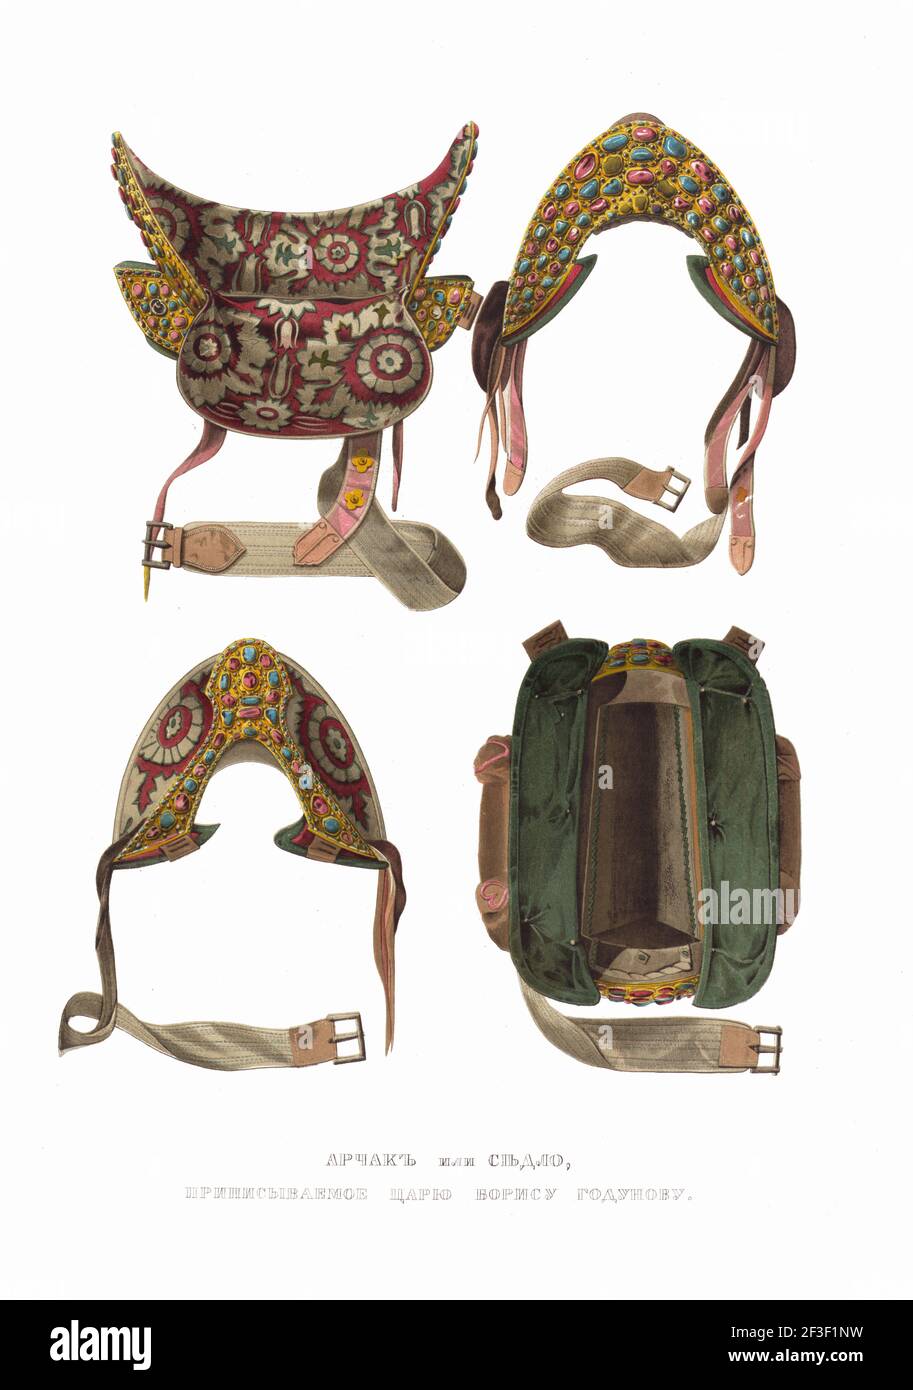 Saddle of Tsar Boris Godunov. From the Antiquities of the Russian State, 1849-1853. Private Collection. Stock Photo